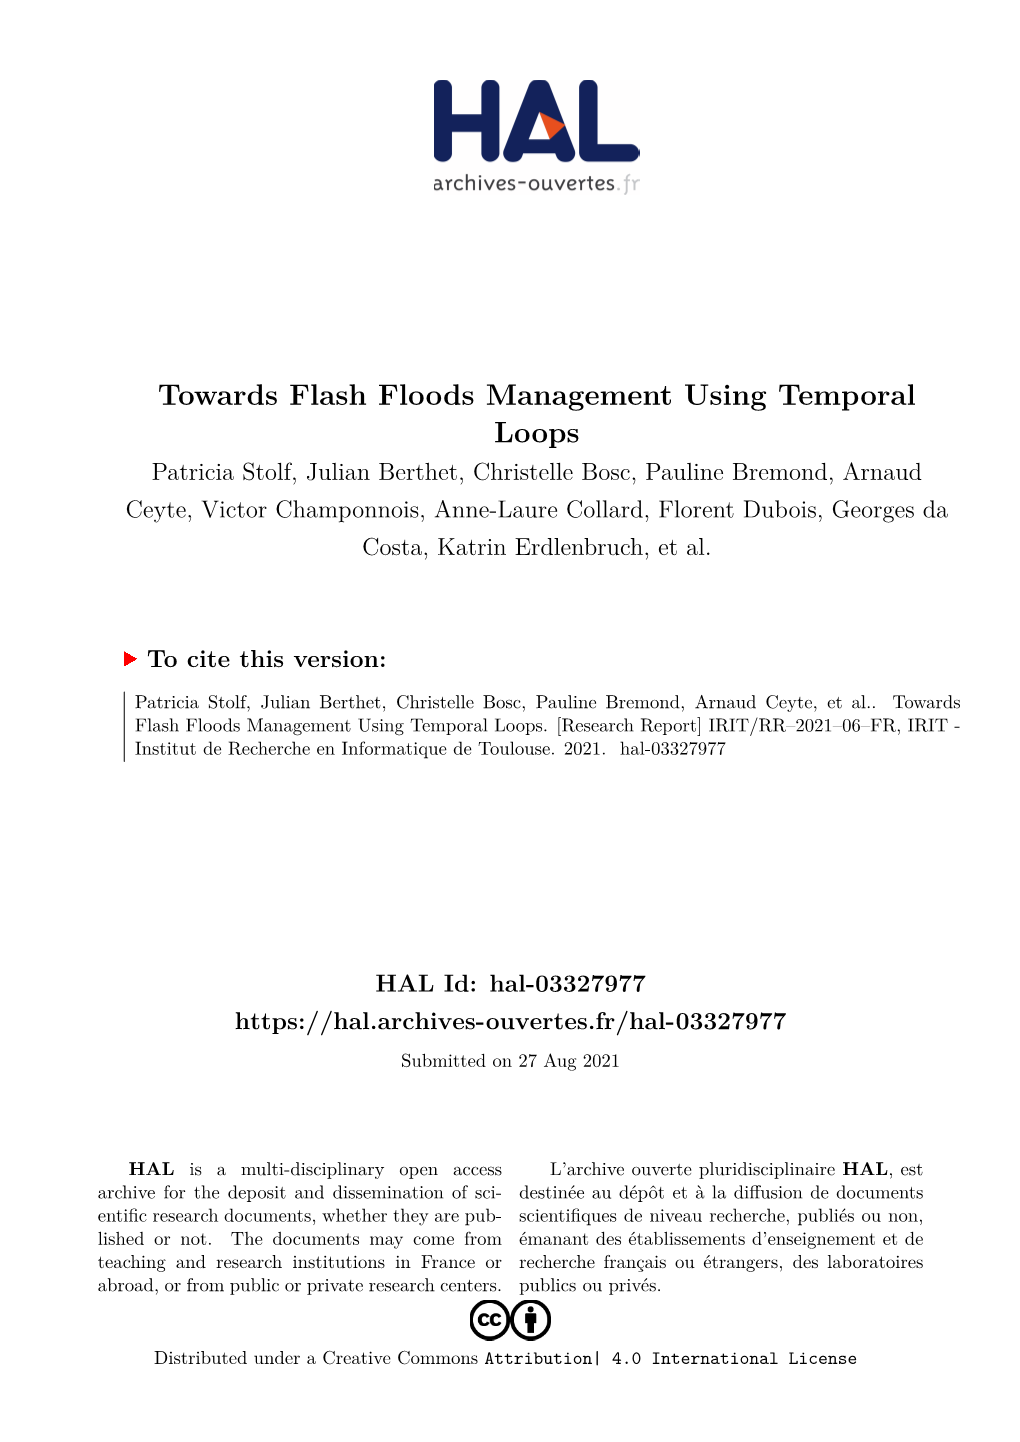 Towards Flash Floods Management Using Temporal Loops